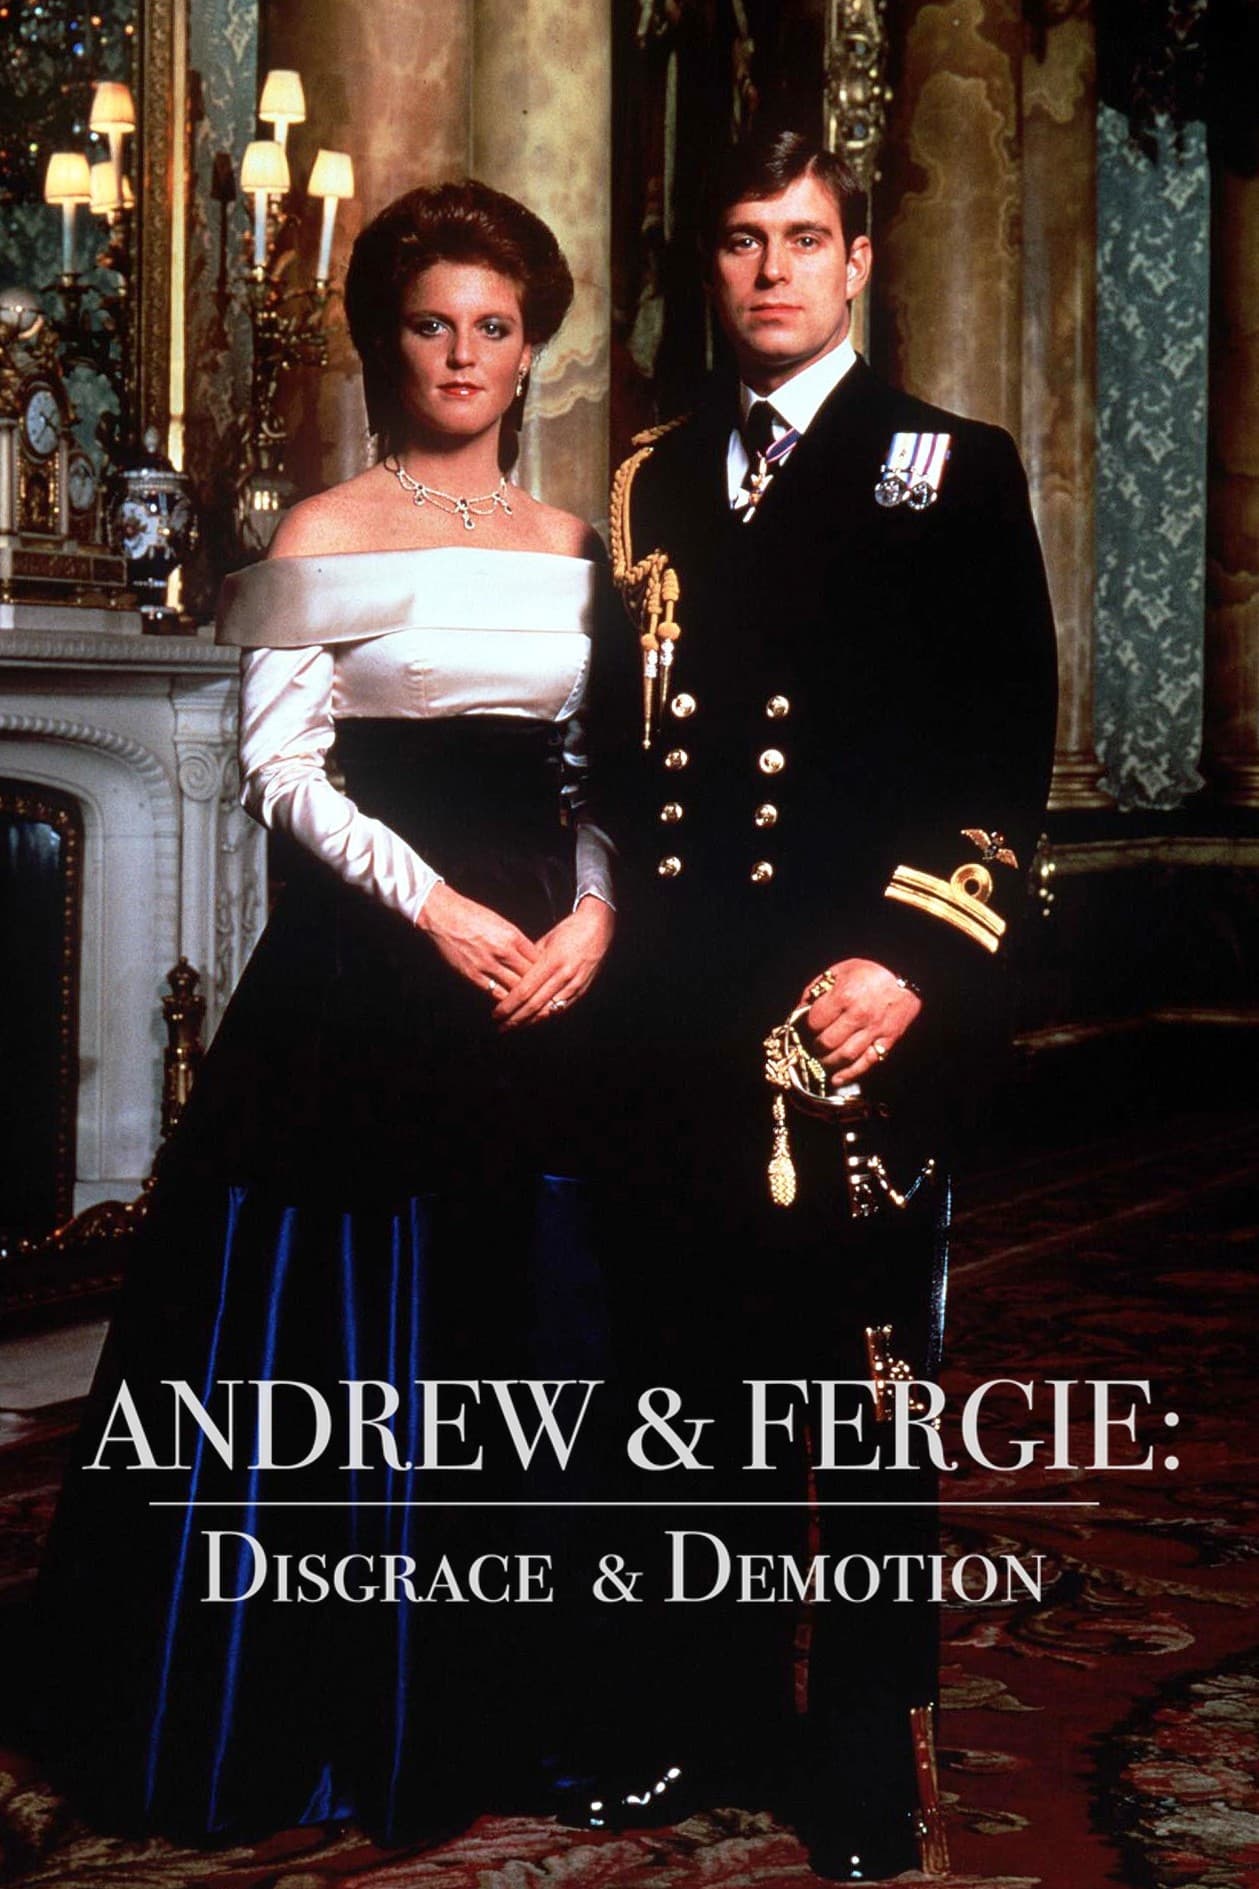 Andrew & Fergie: Disgrace and Demotion